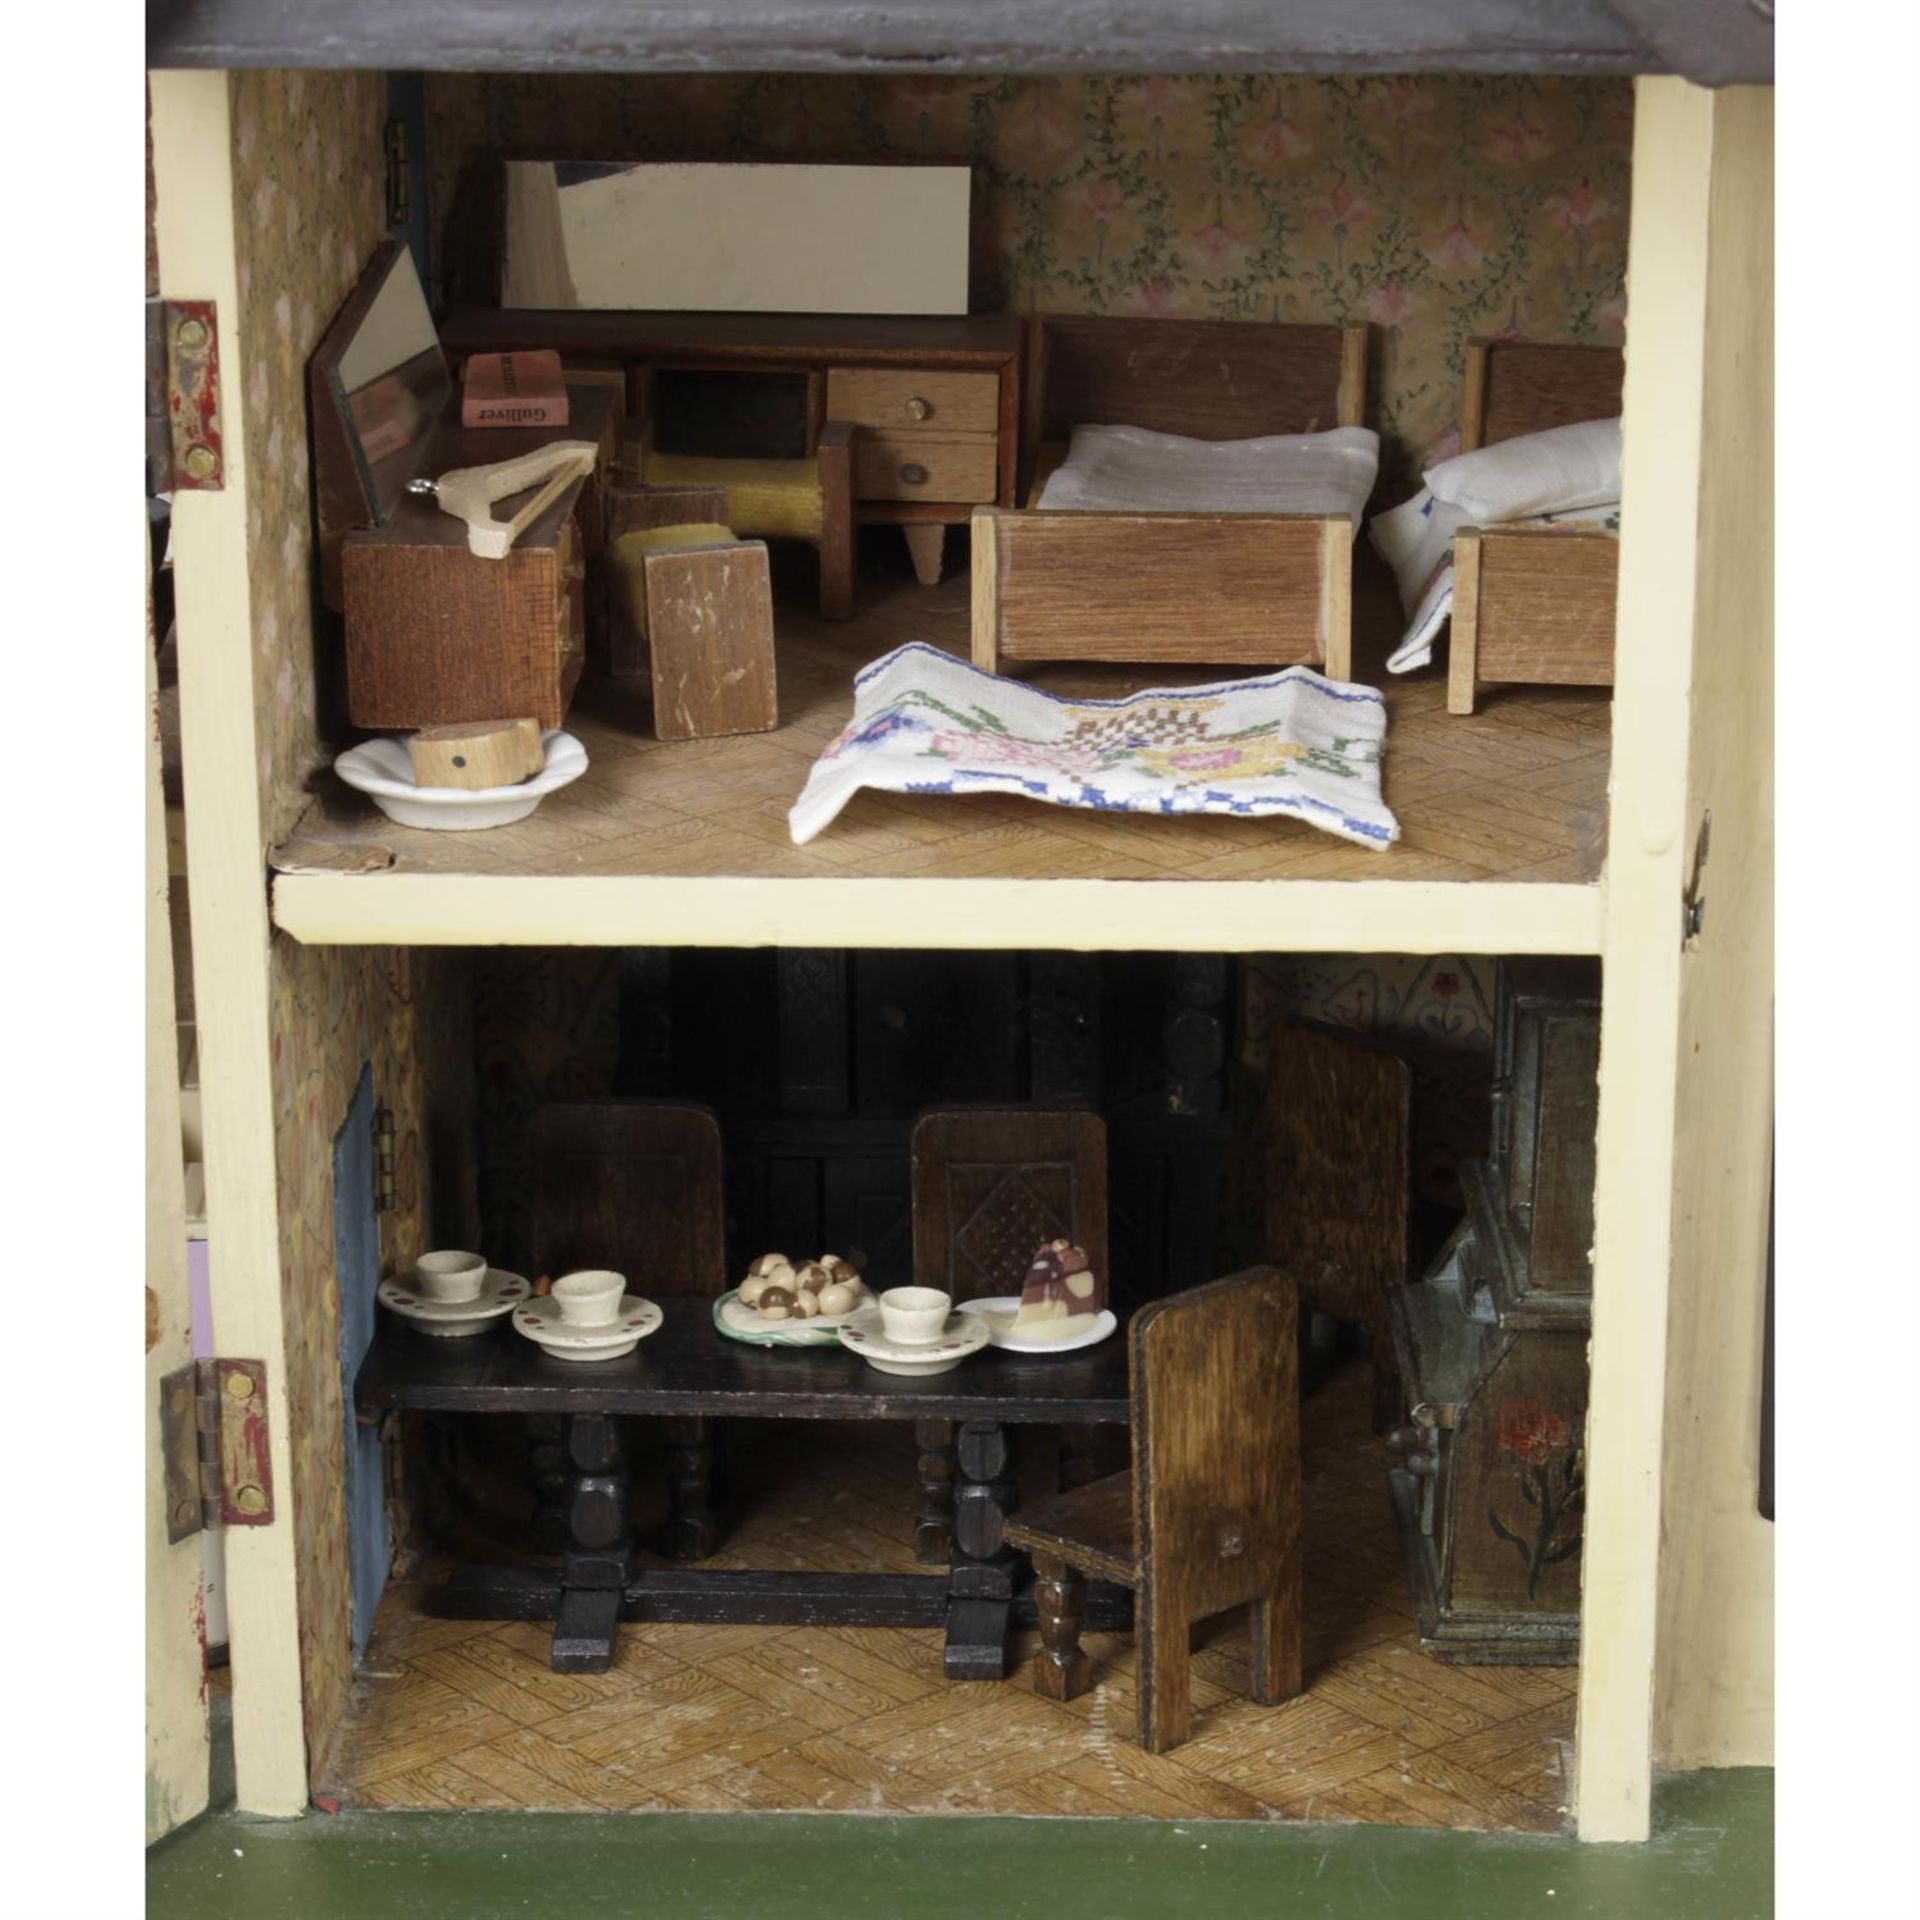 A mid 20th century Triang wooden dolls house, a1930's Triang example and an early 20th century - Image 3 of 5